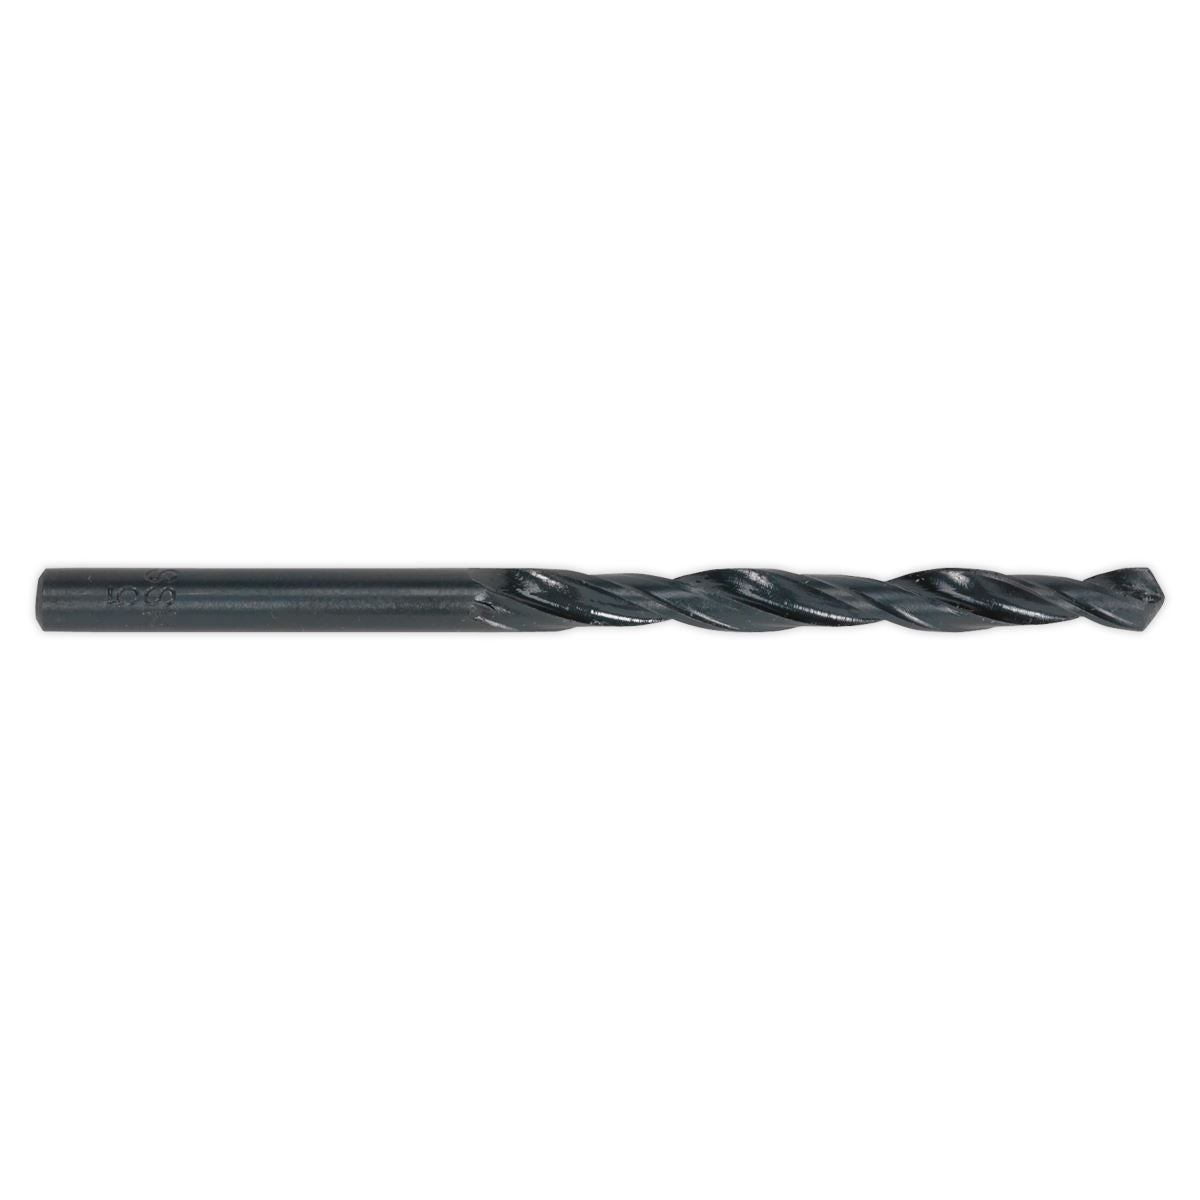 Sealey HSS Roll Forged Drill Bit Ø6mm Pack of 10